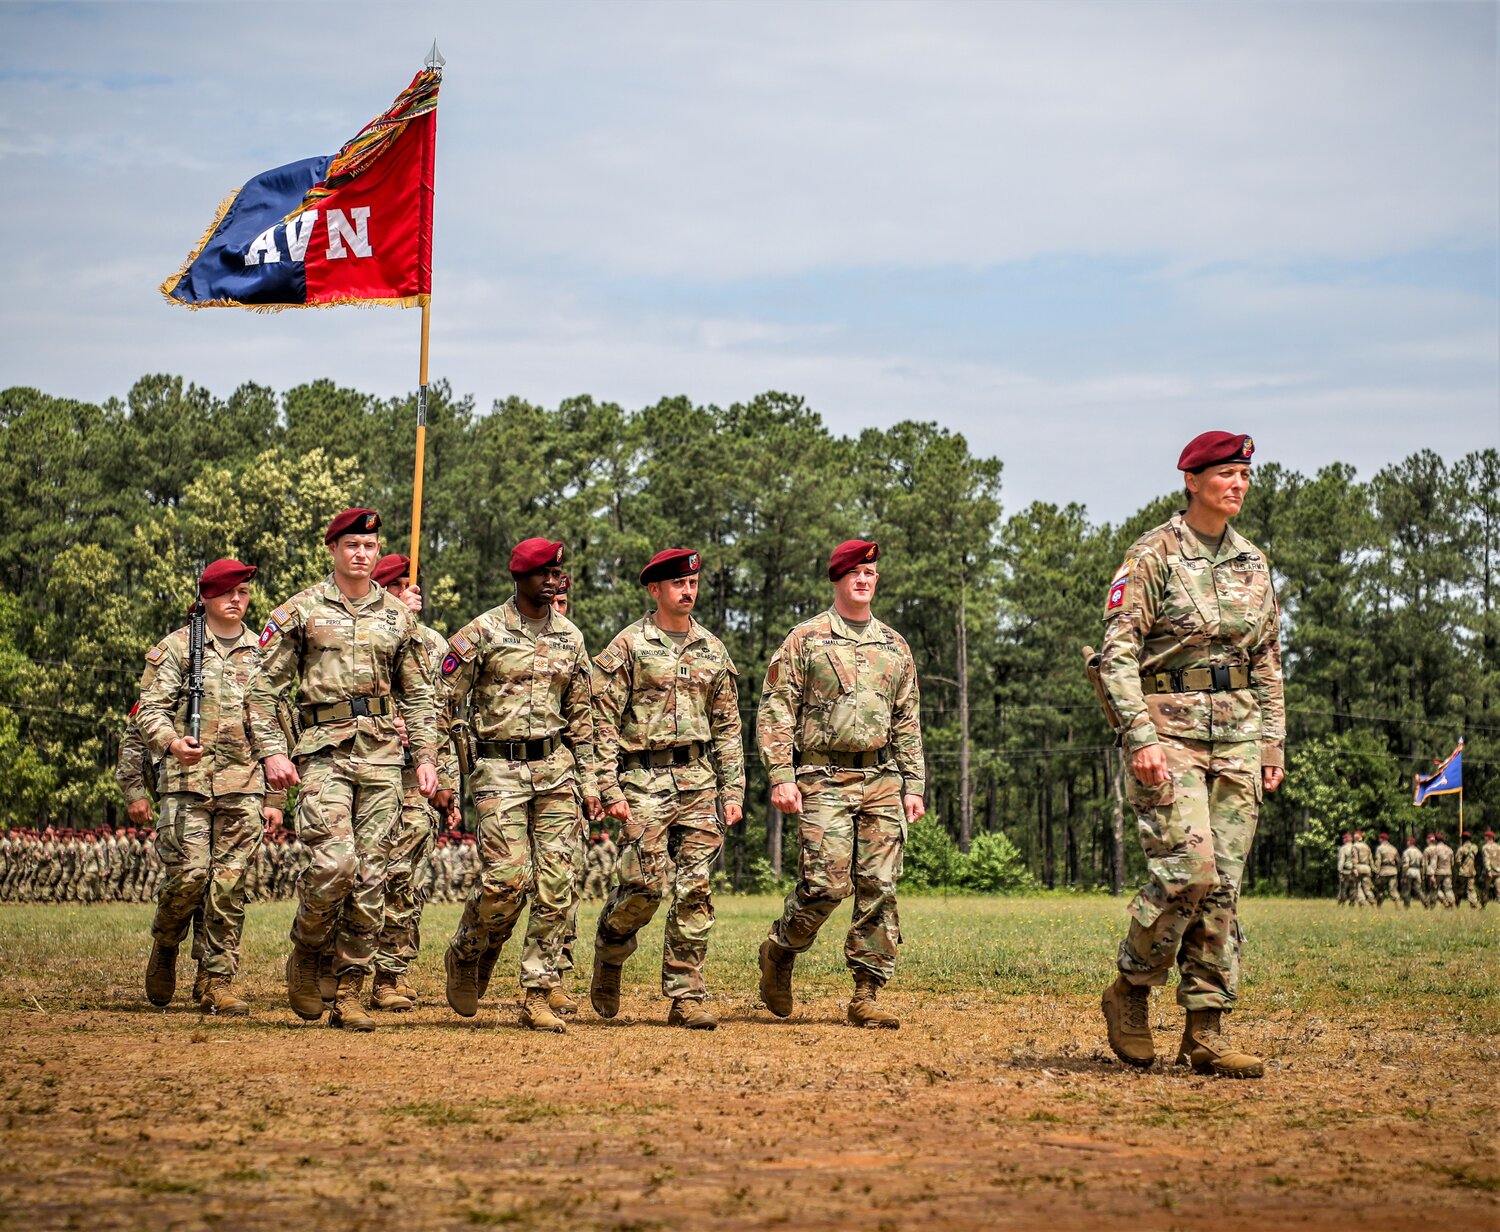 Paratroopers of the 82nd Airborne Division march in a pass in review ceremony on Thursday on Fort Bragg to conclude All American Week.